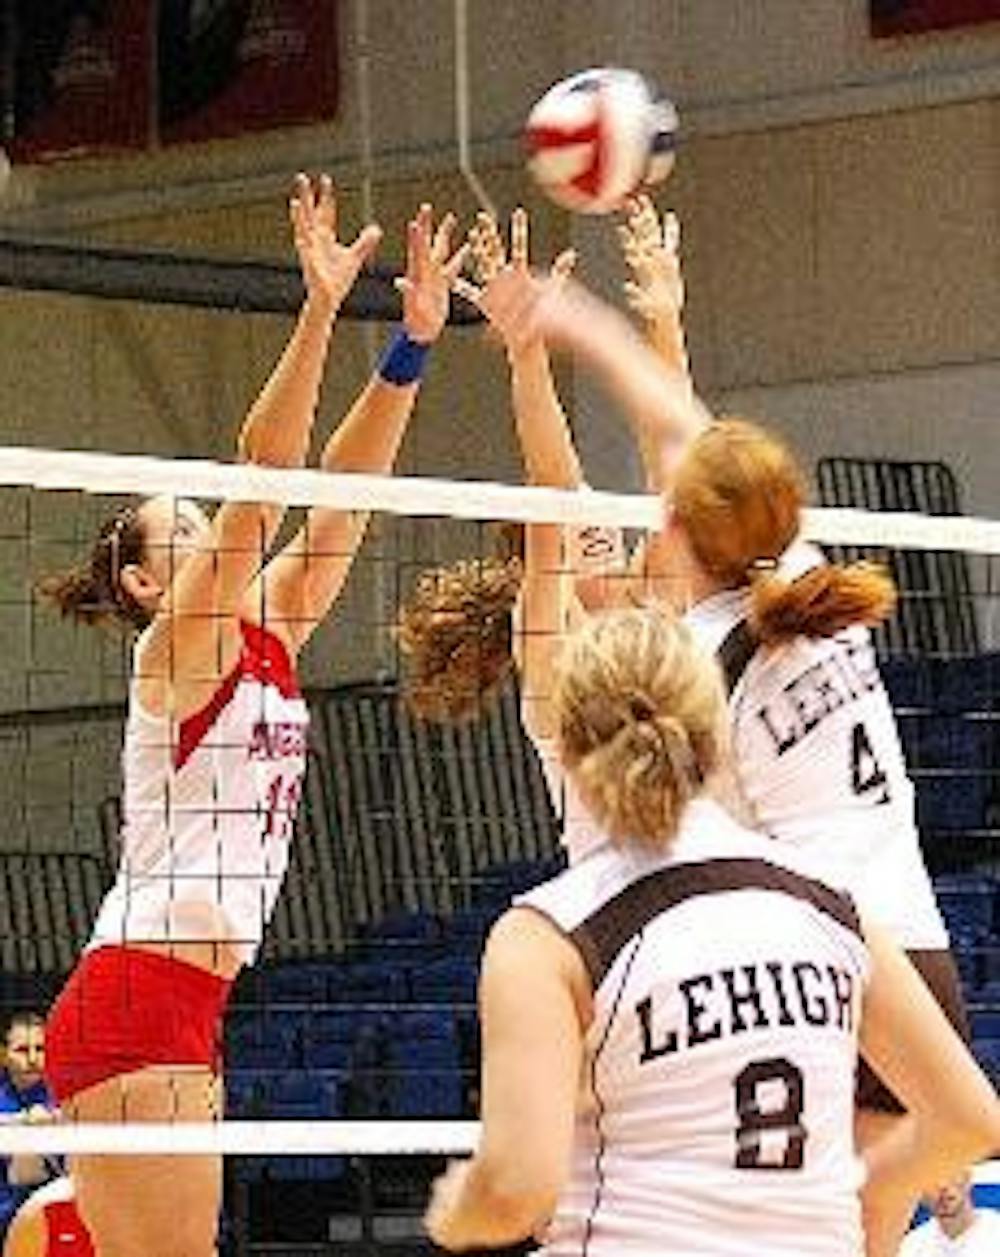 HANDS UP - Senior setter Christina Nash (No. 11) and junior middle blocker Claire Recht team up to block their Lehigh opponents in Saturday's 3-0 victory over the Mountain Hawks.  The Eagles have won five straight matches and 15 consecutive sets during th